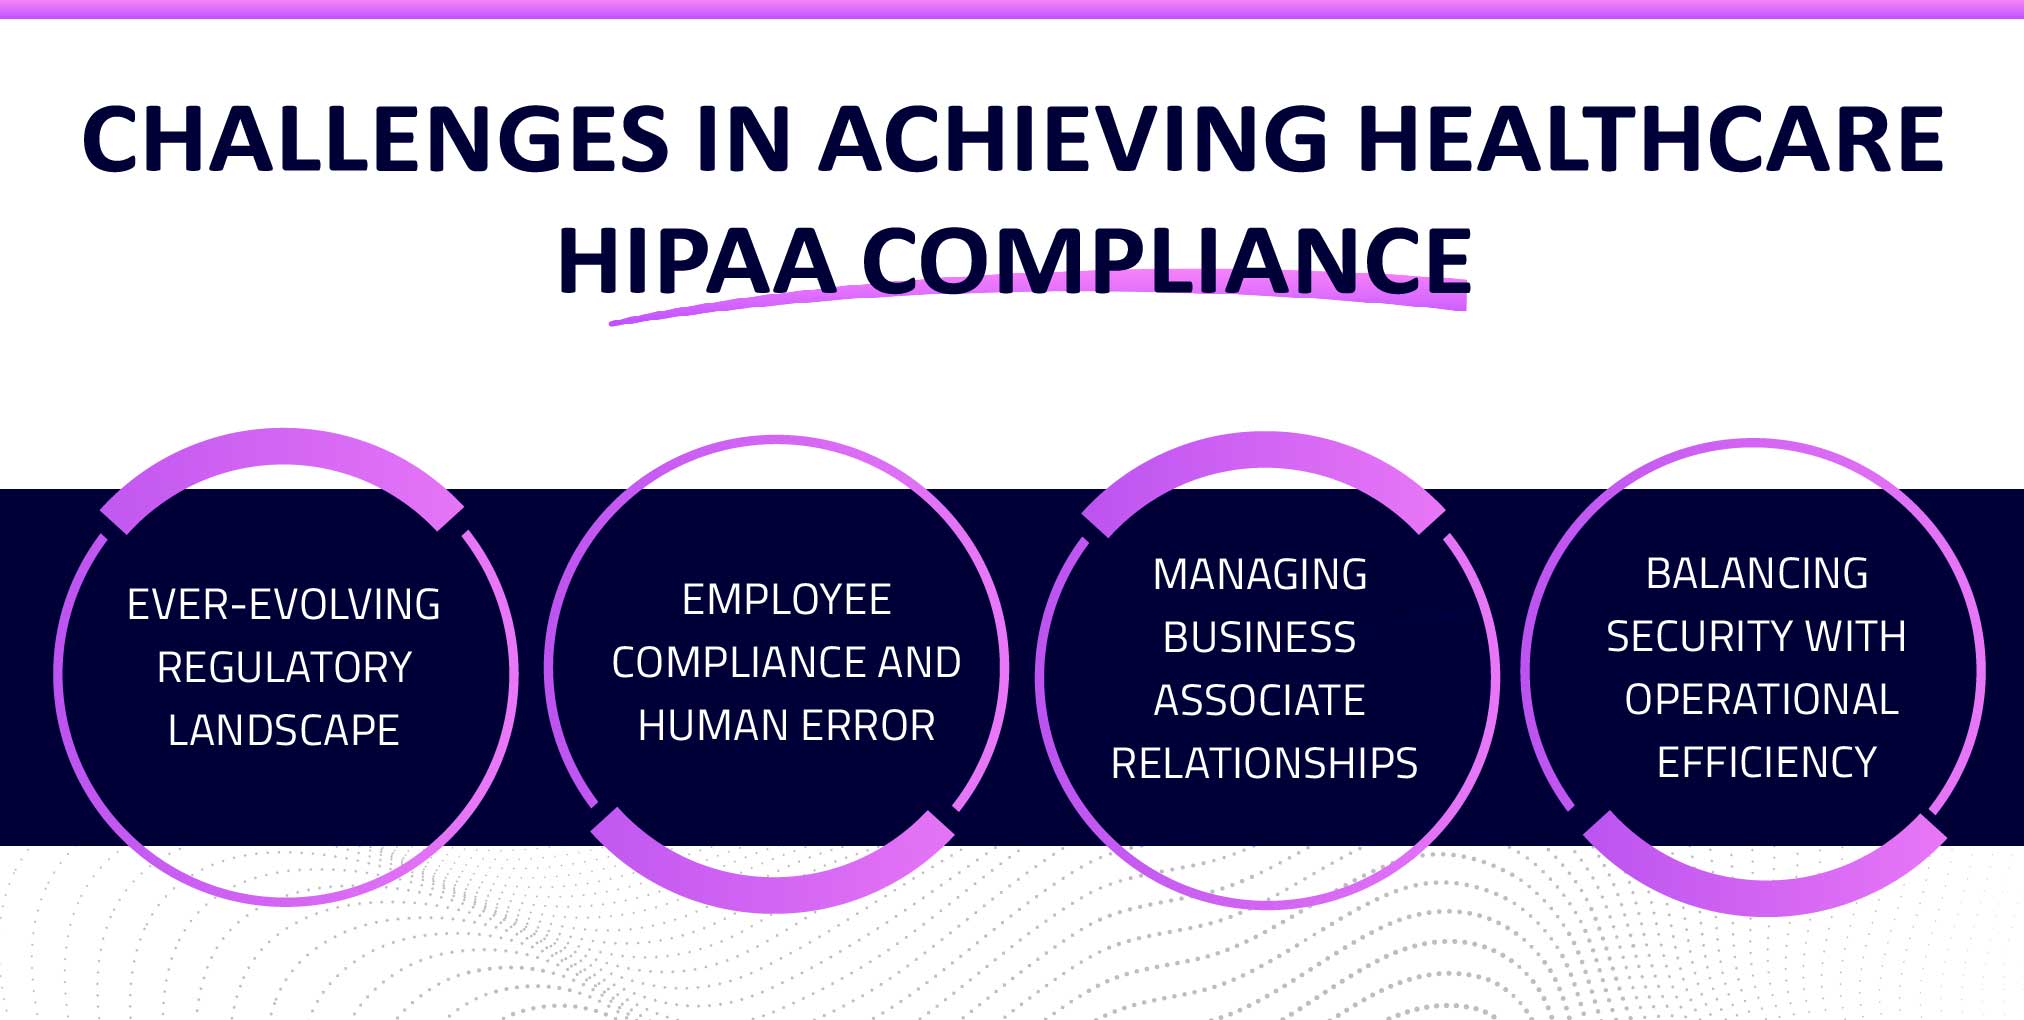 Common Challenges in Achieving Healthcare HIPAA Compliance